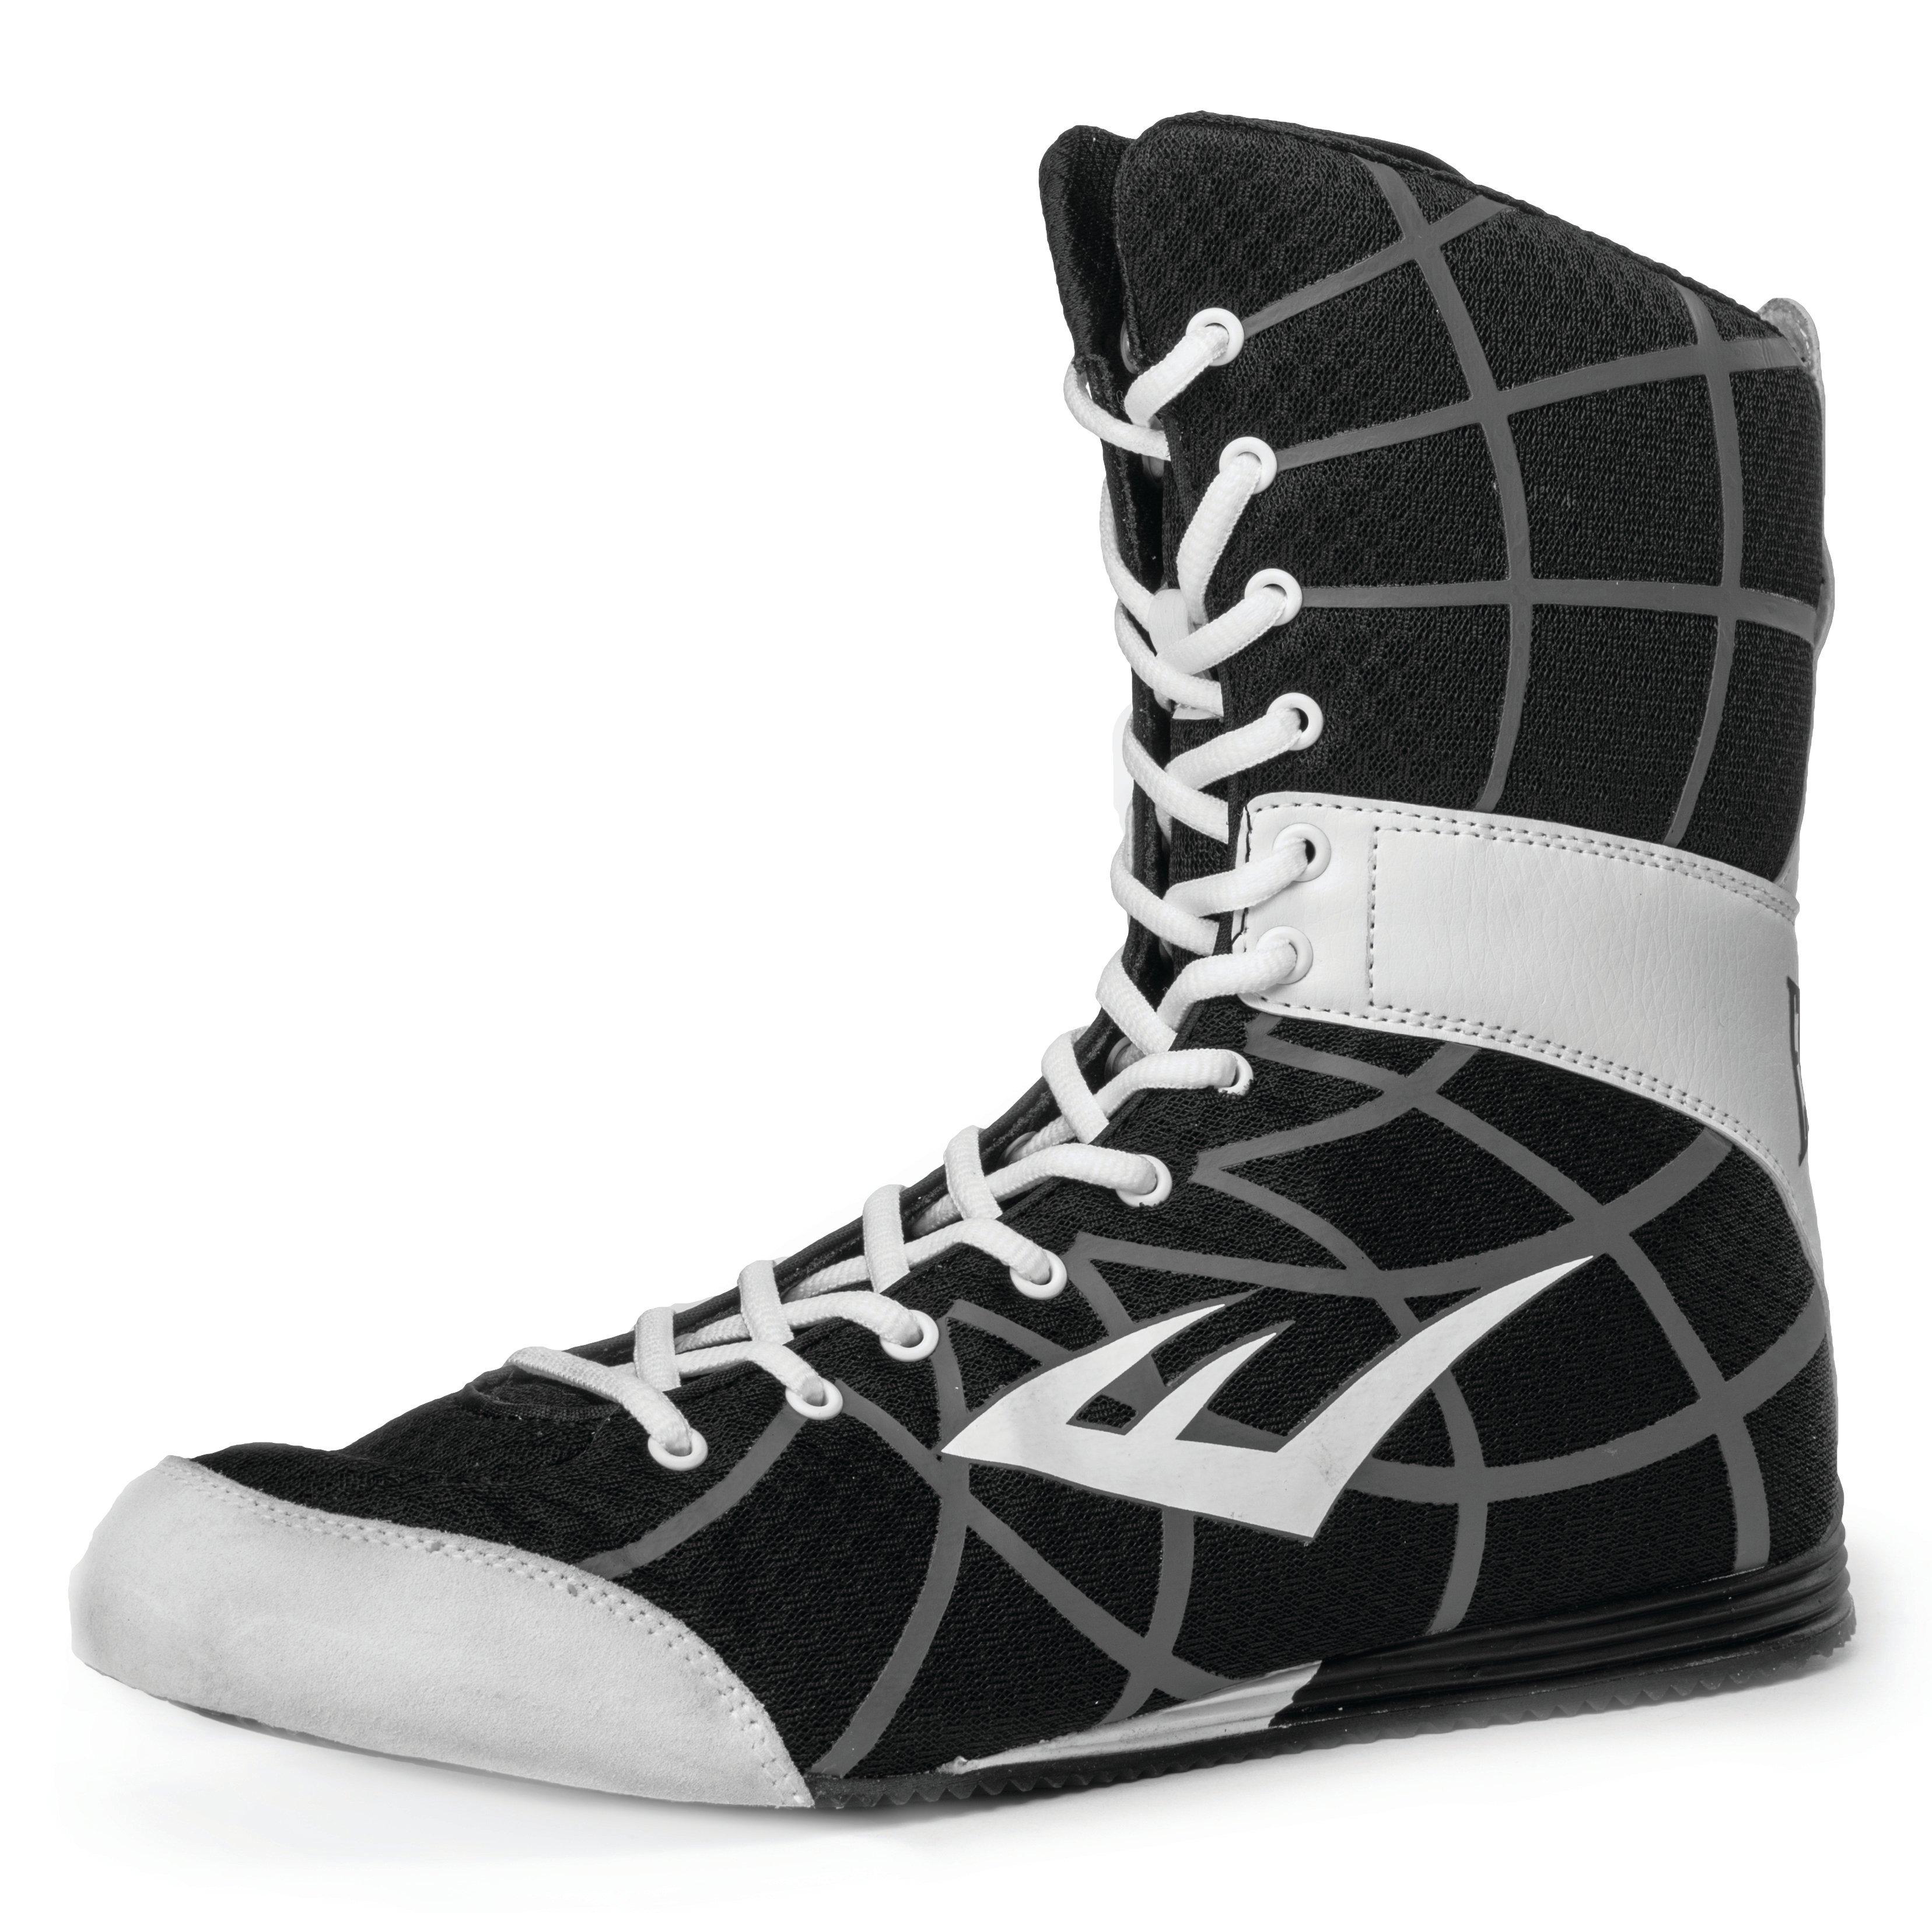 wit terras geloof Everlast Grid High Top Boxing Shoes-Black